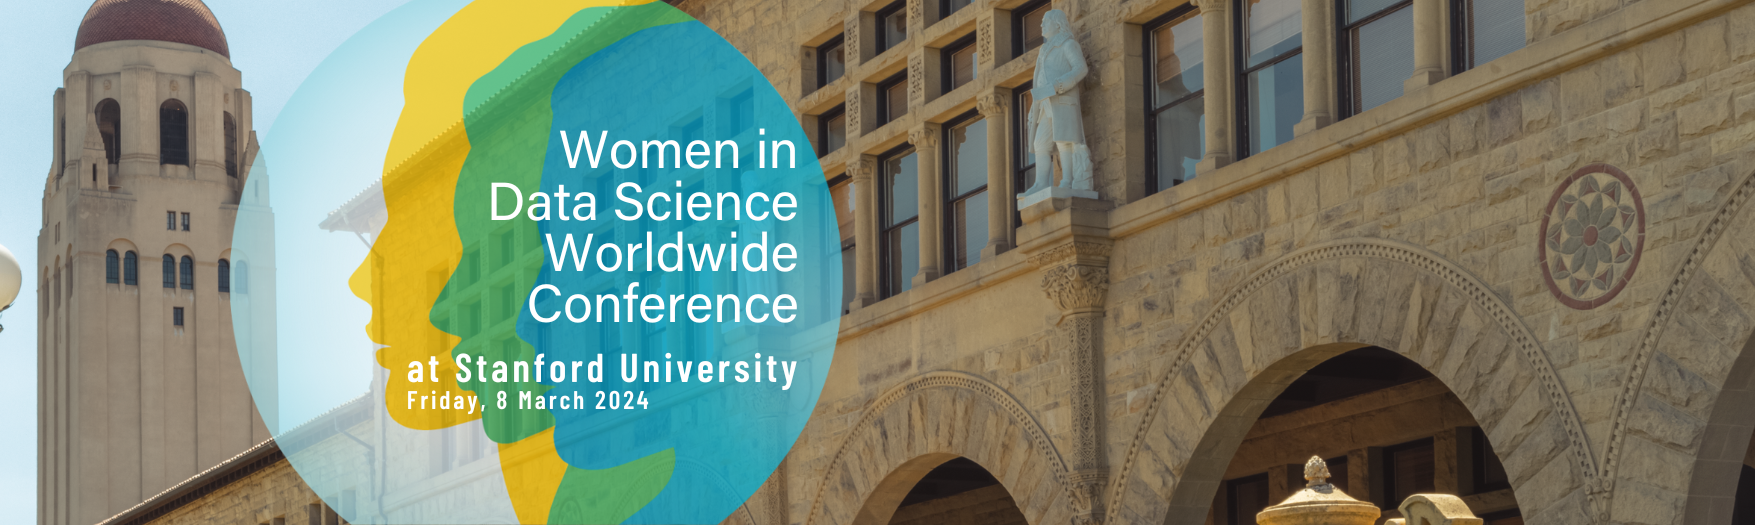 Women in Data Science Worldwide Conference - Stanford